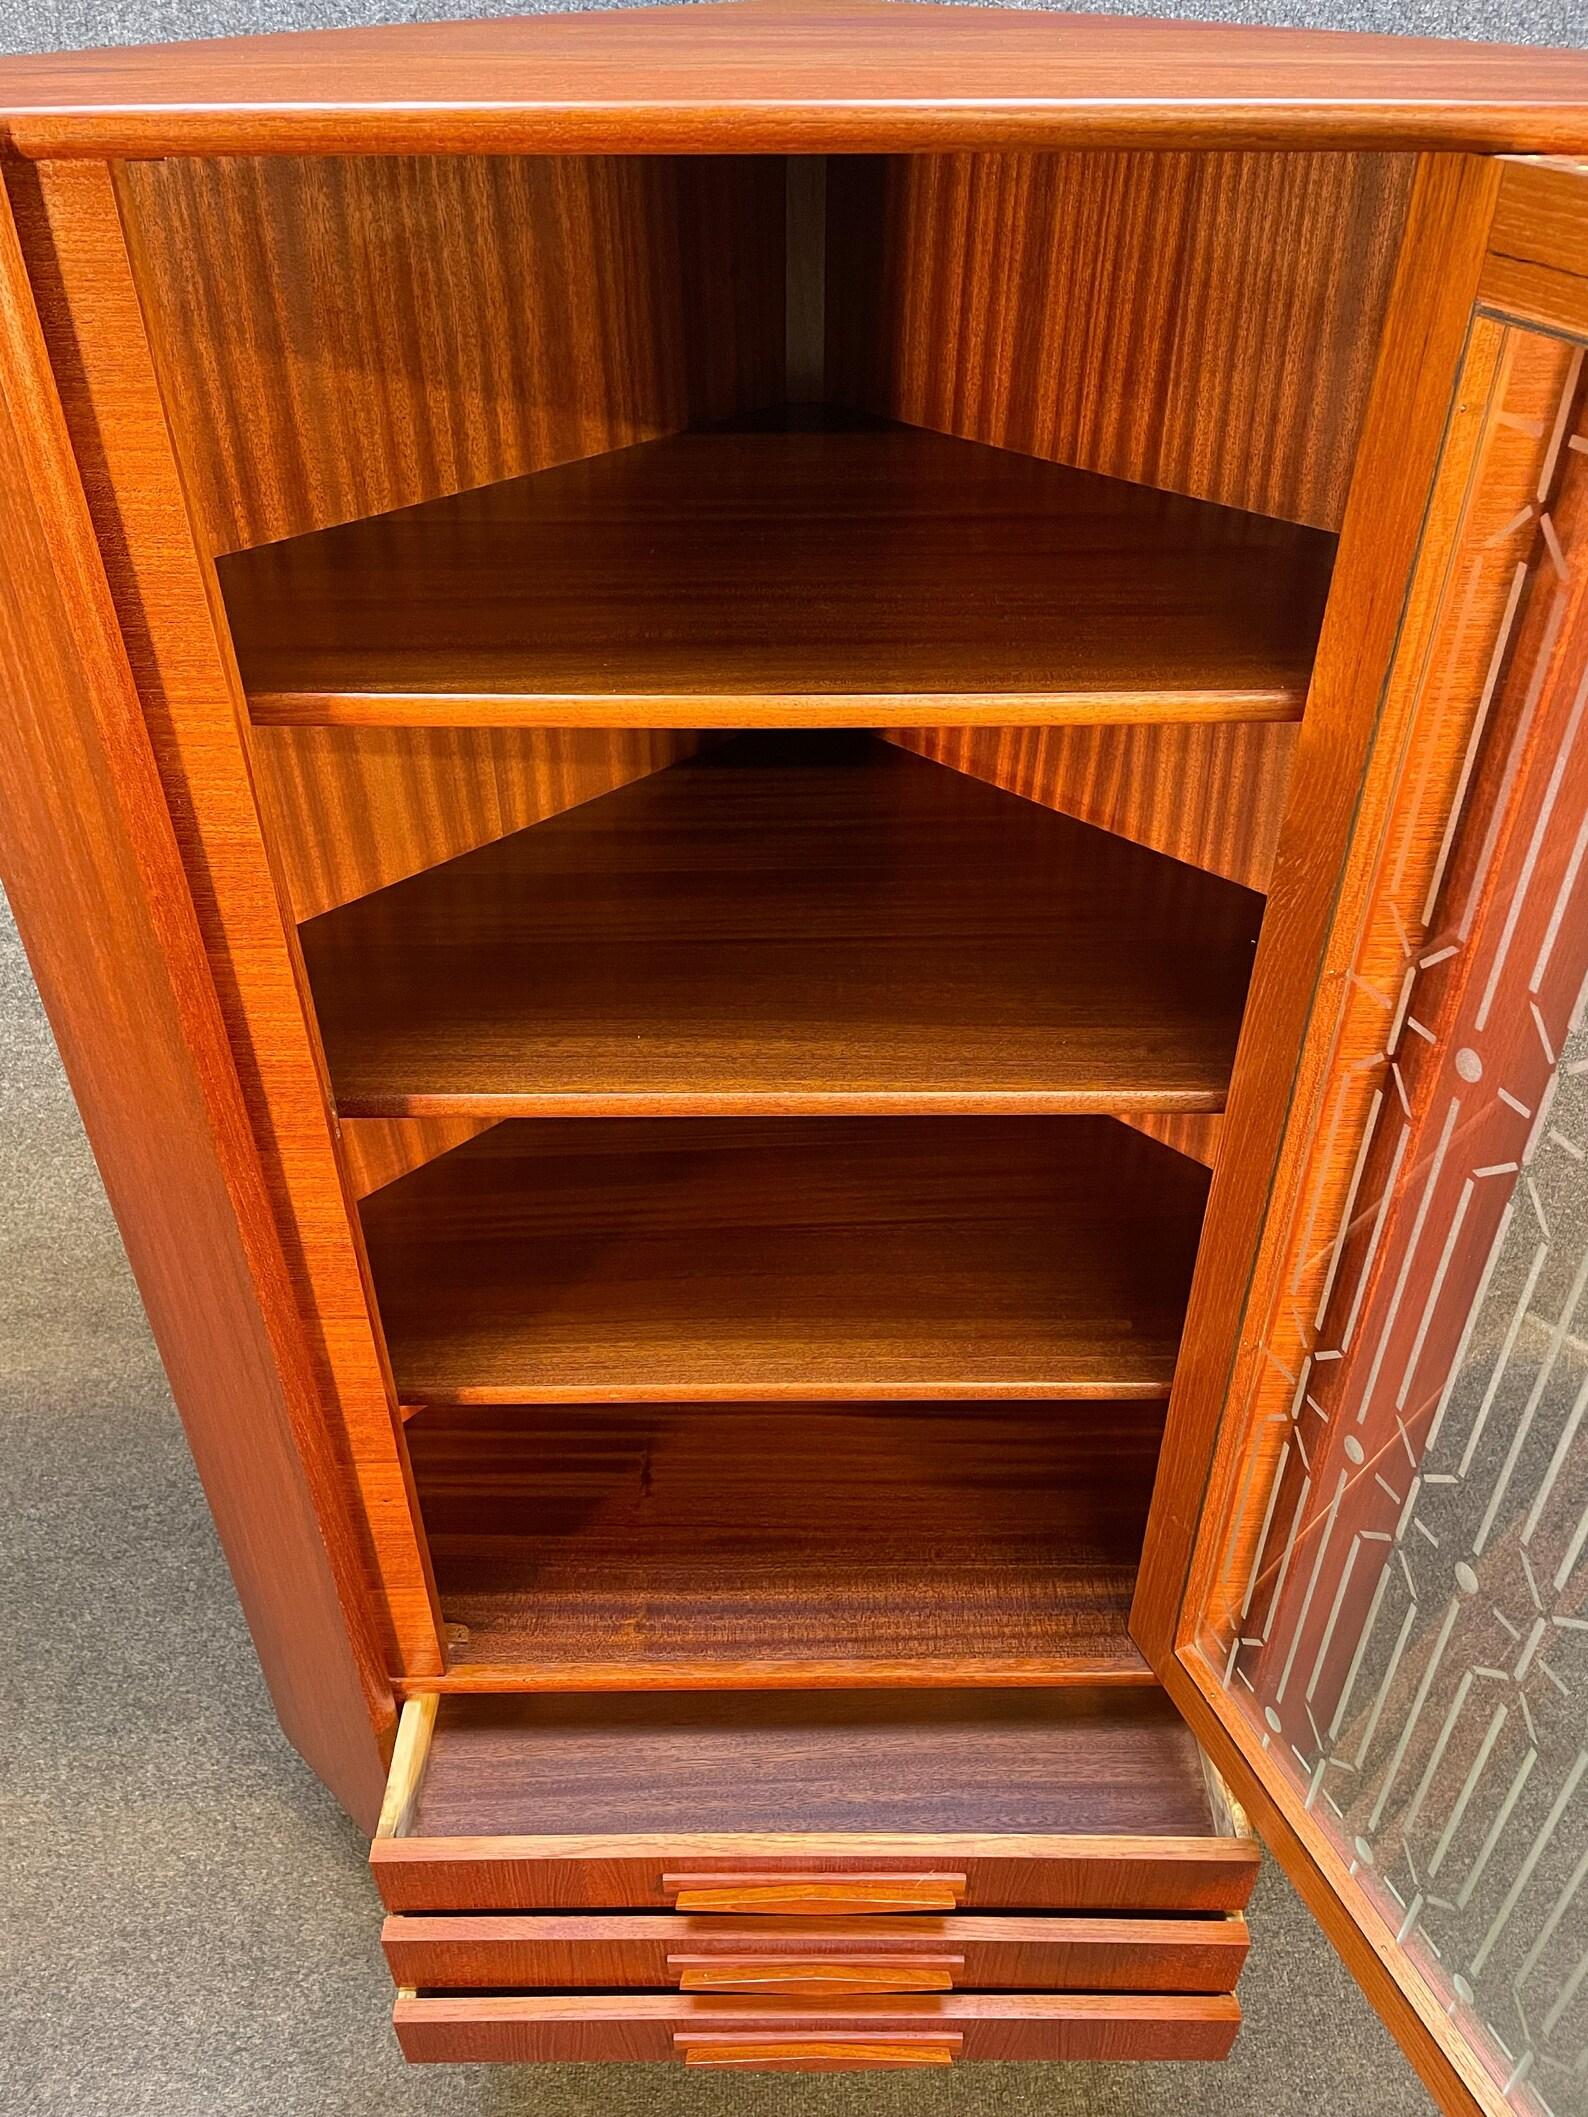 Here is a beautiful vintage corner cabinet in teak with a retro pattern etched glass recently imported from Europe to California before its refinishing.
This cabinet was manufactured in the 1960's in Denmark and is attributed to Omann Jun.
It